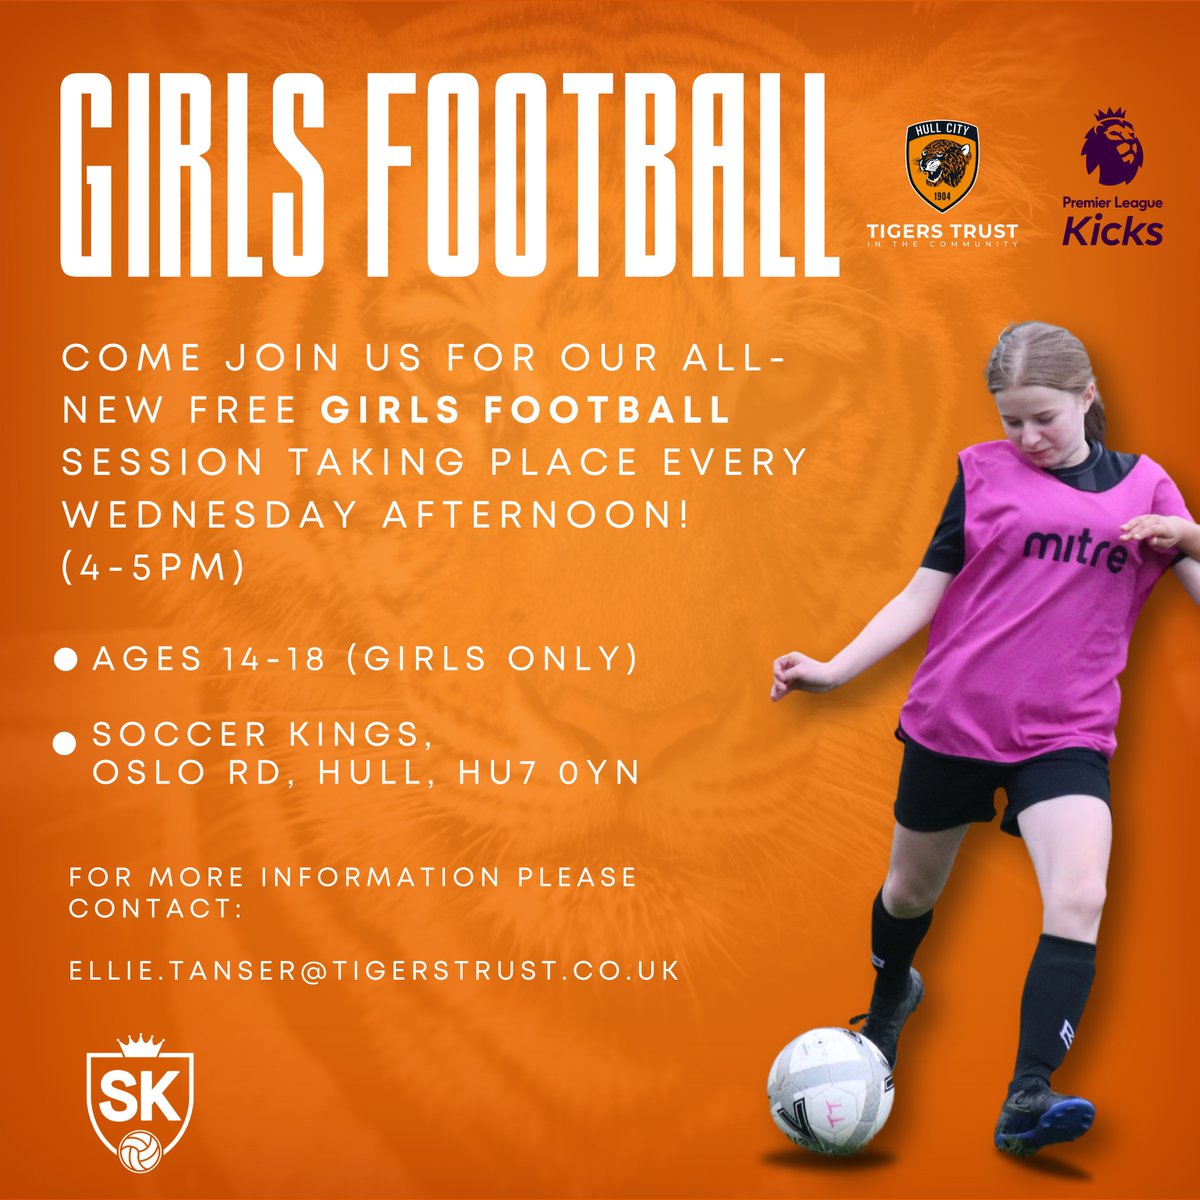 Come join us this afternoon for our brand-new #PLKicks 𝗙𝗥𝗘𝗘 Girls Football sessions, taking place every Wednesday (4-5pm)

🟠 Ages 14-18 
🏦 Soccer Kings, Oslo Road, Hull, HU7 0YN

We would love to see you there! 👋

📧 ellie.tanser@tigerstrust.co.uk